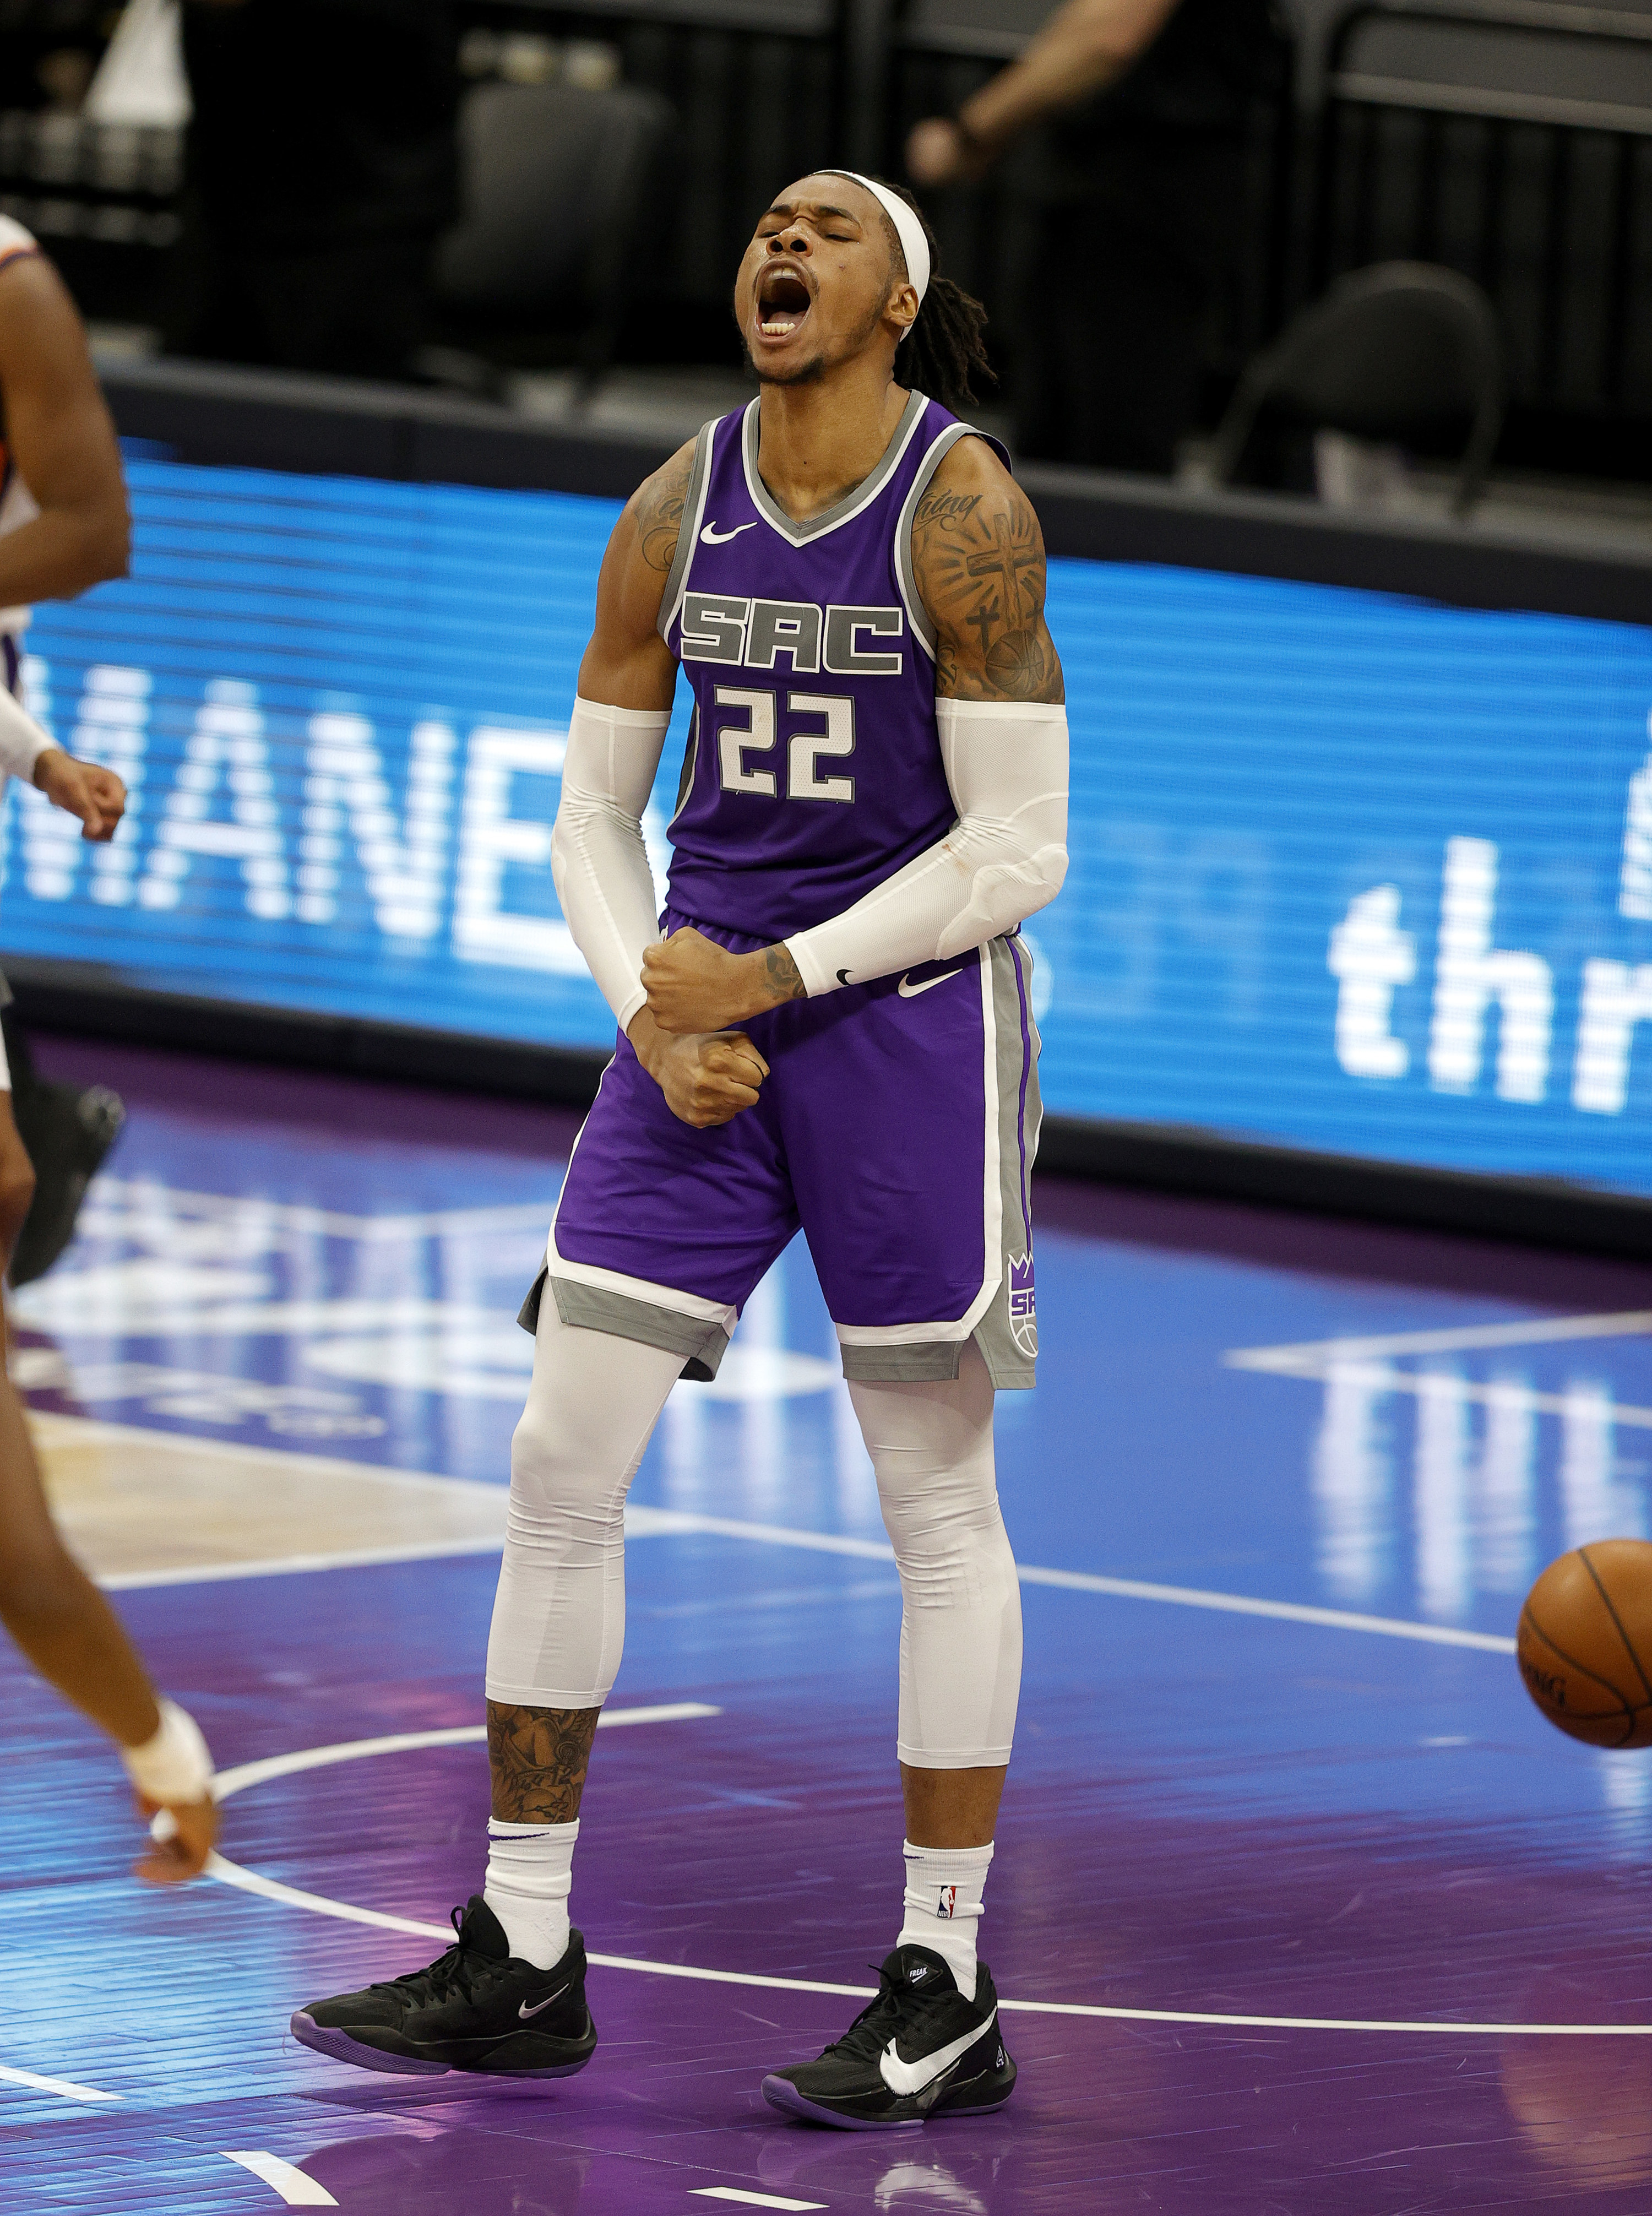 Purple &quot;SAC&quot; jersey with gray lettering